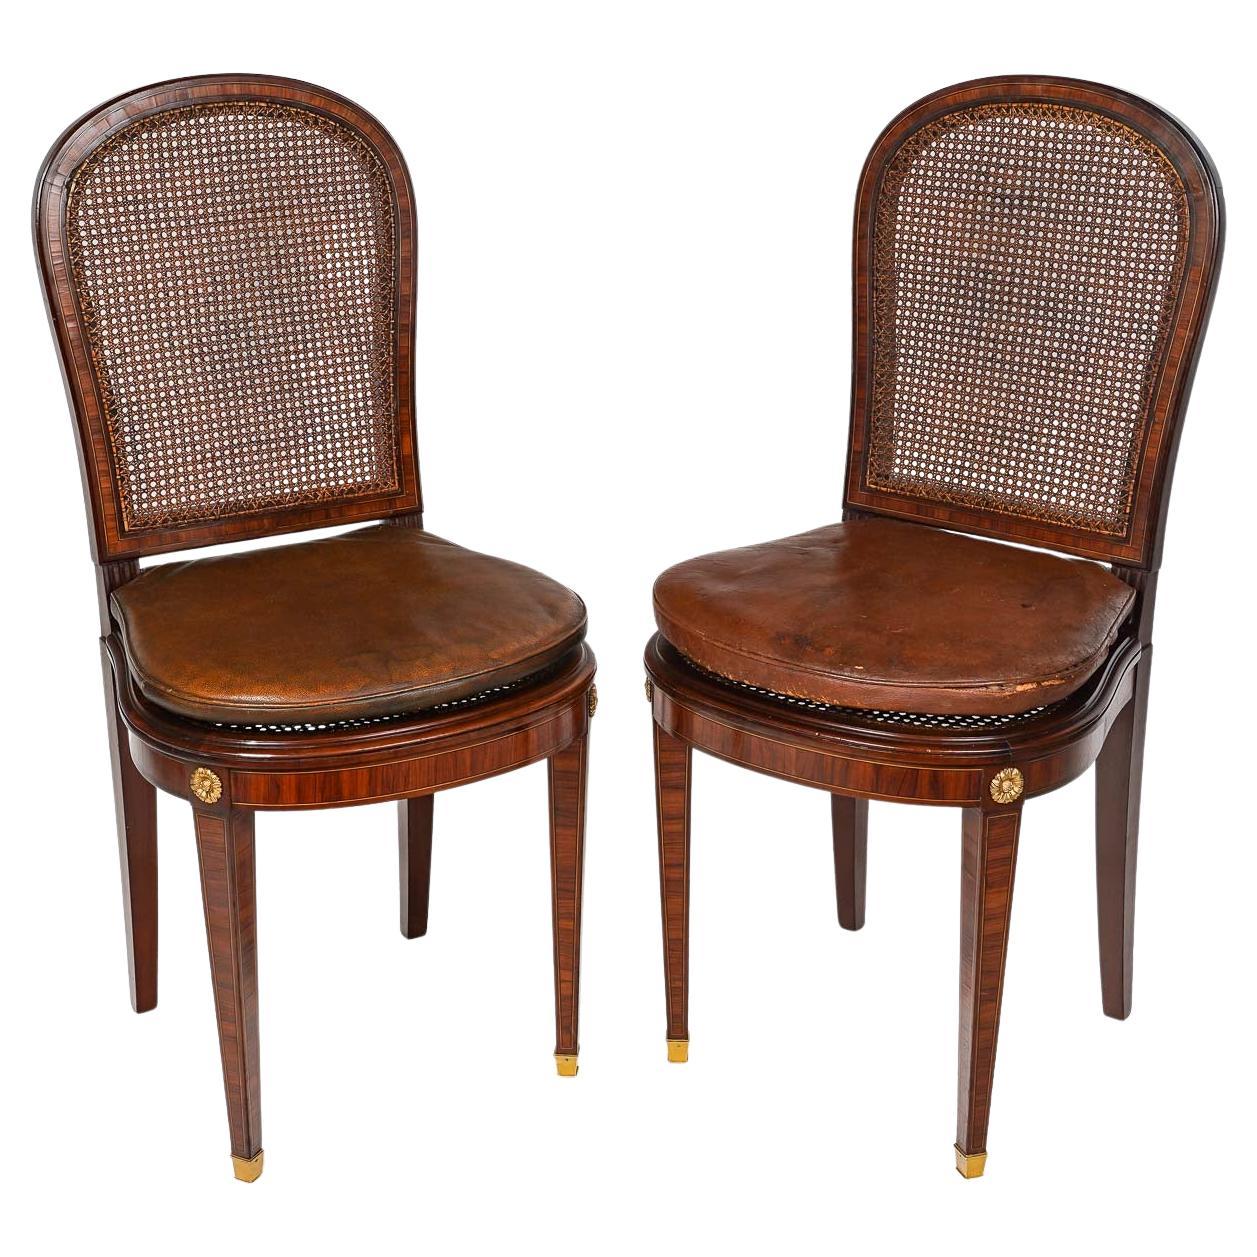 Pair of 19th Century Chairs in the Louis XVI Style For Sale